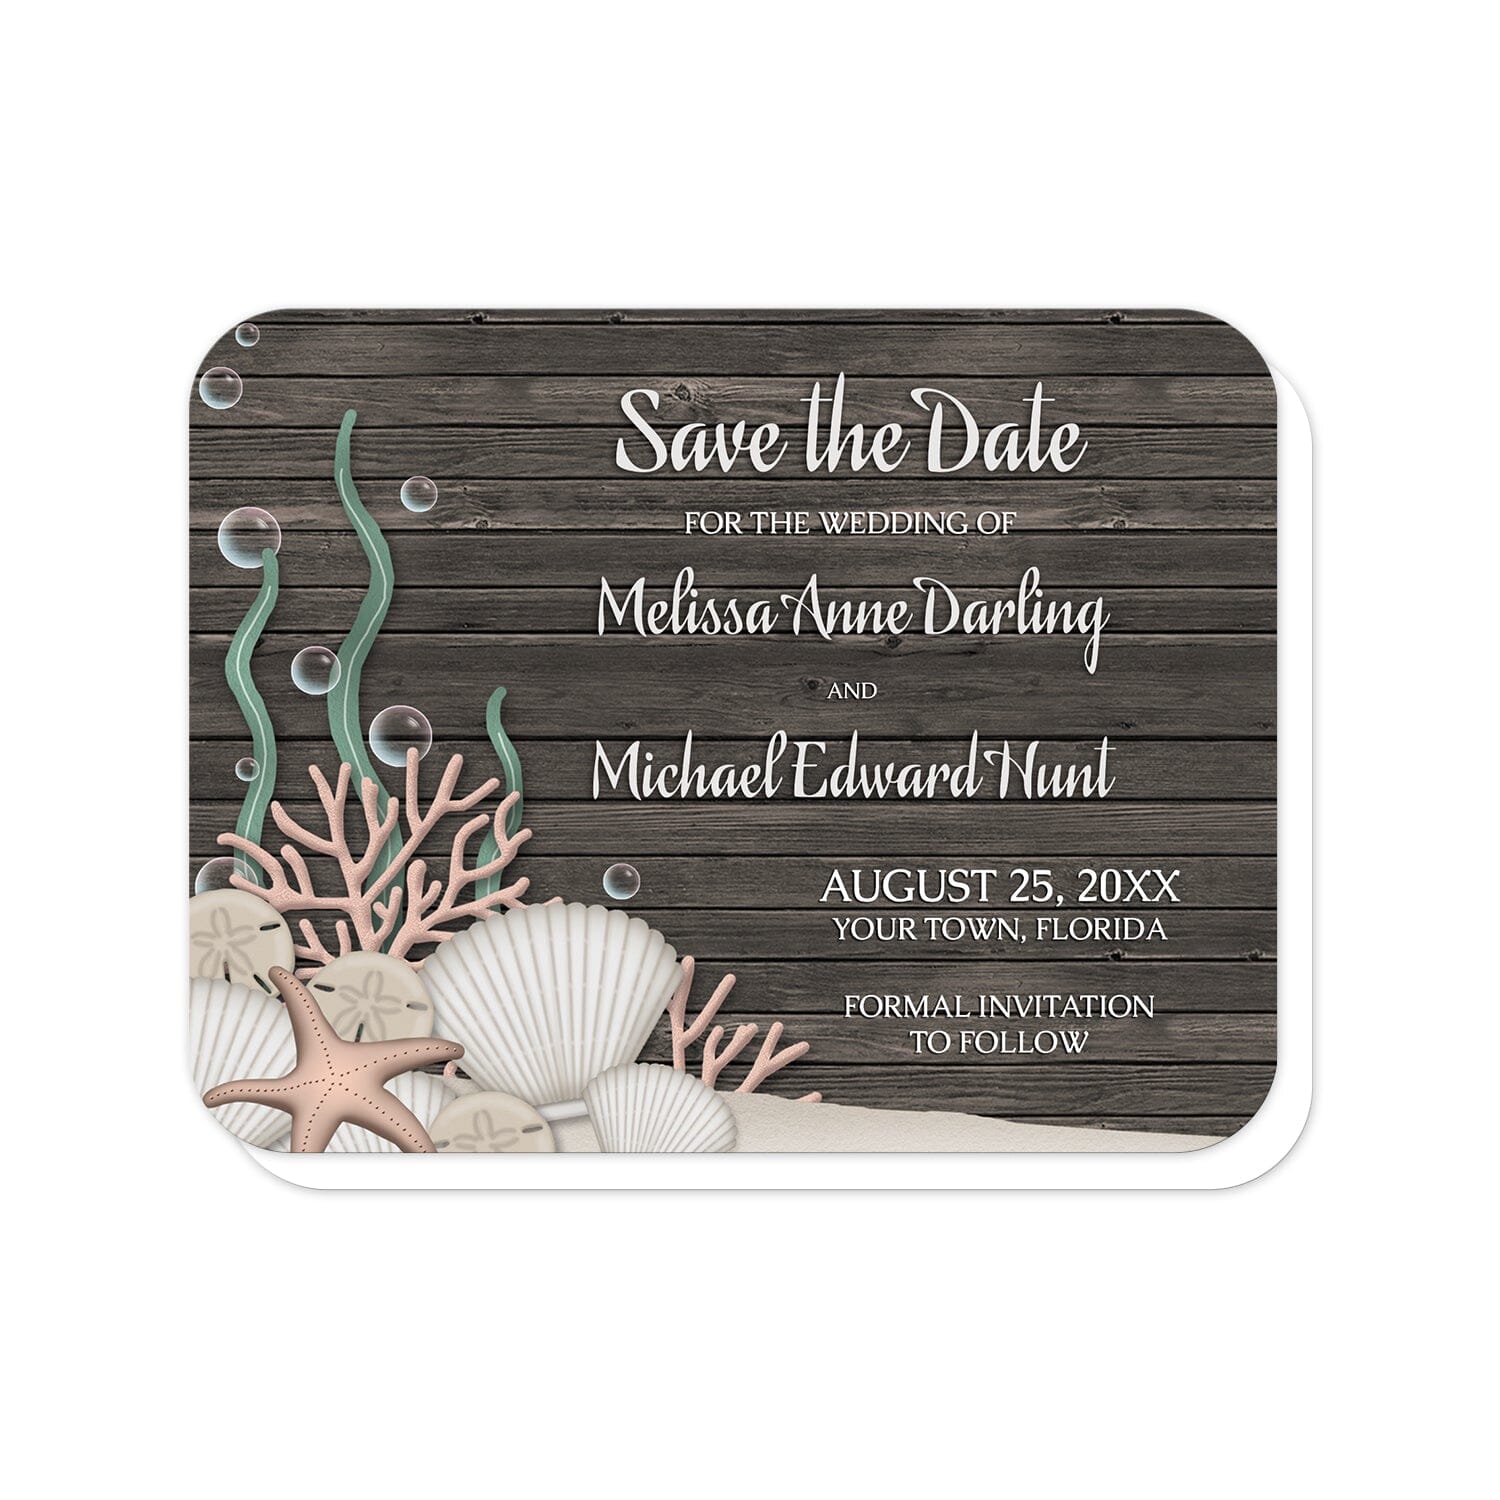 Rustic Beach Seashells and Wood Save the Date Cards (with rounded corners) at Artistically Invited. Rustic beach seashells and wood save the date cards with a rustic "on the beach" or "under the sea" theme. They are designed with a dark wood pattern, sandy seabed, assorted seashells, coral, and kelp. Your personalized wedding date announcement details are custom printed in white over the wood background.